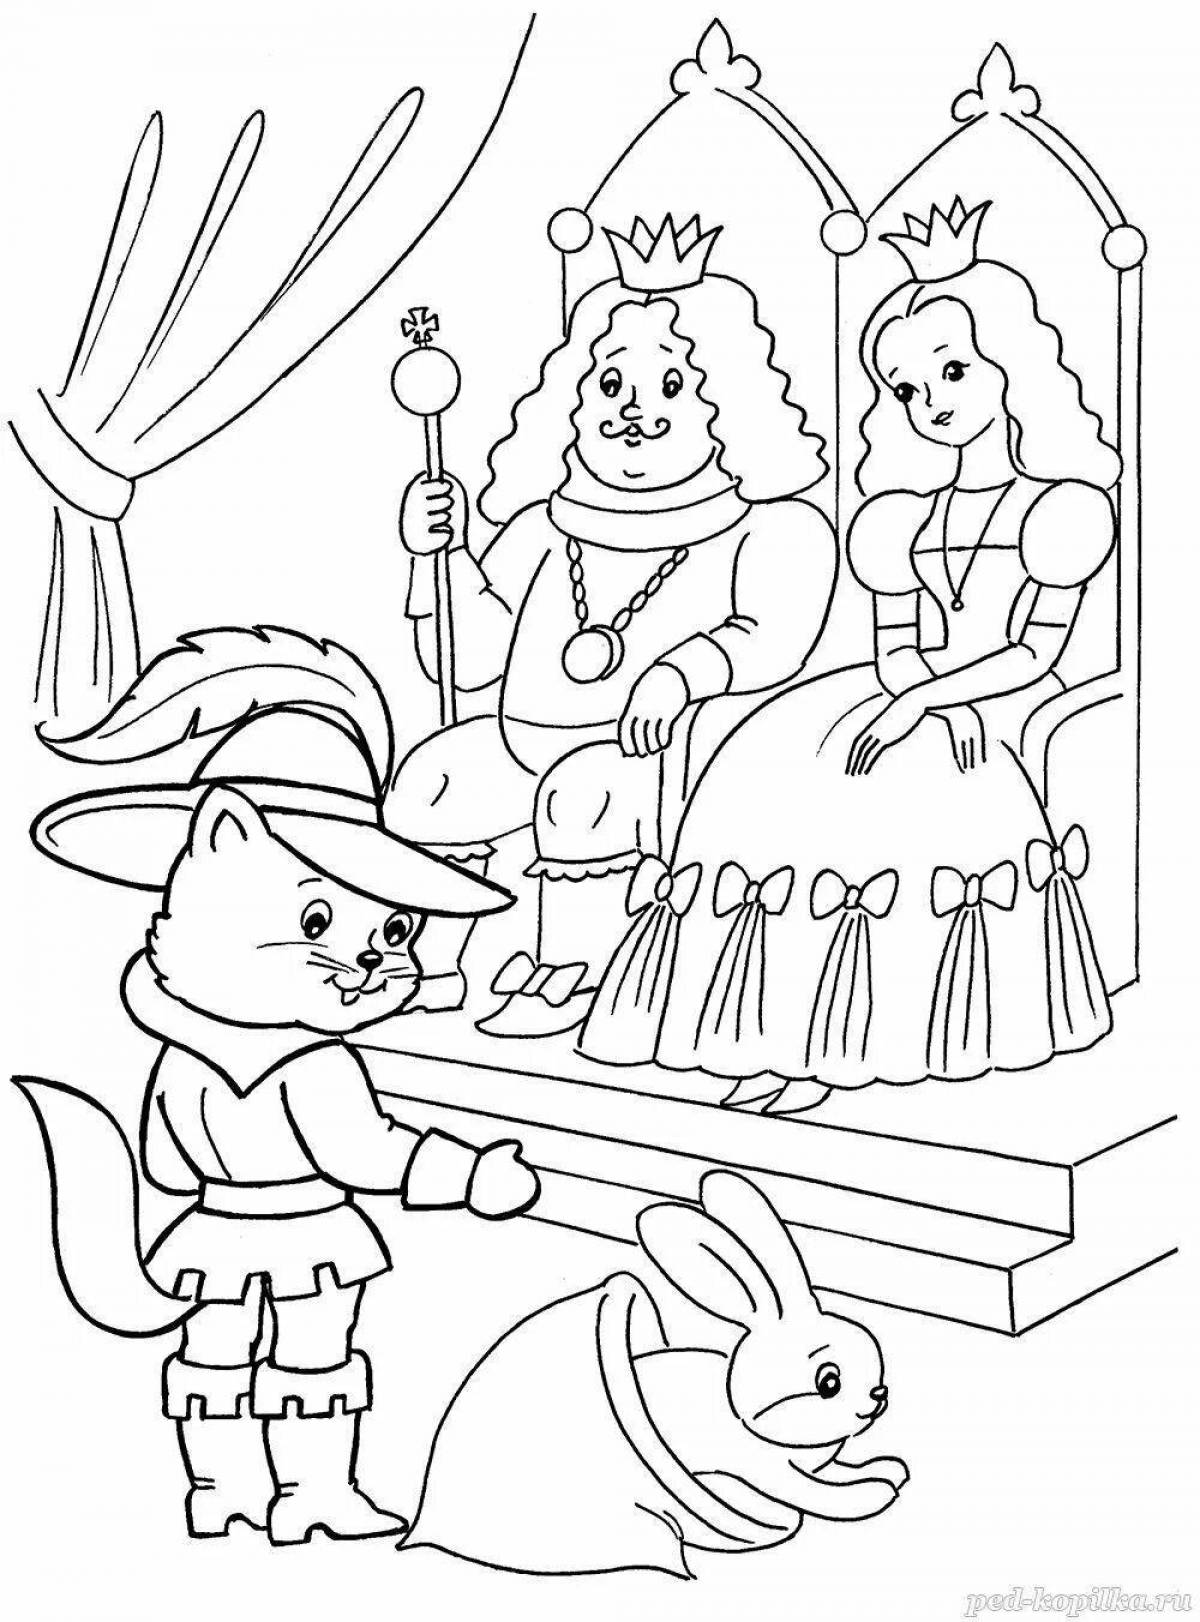 Coloring page playful puss in boots